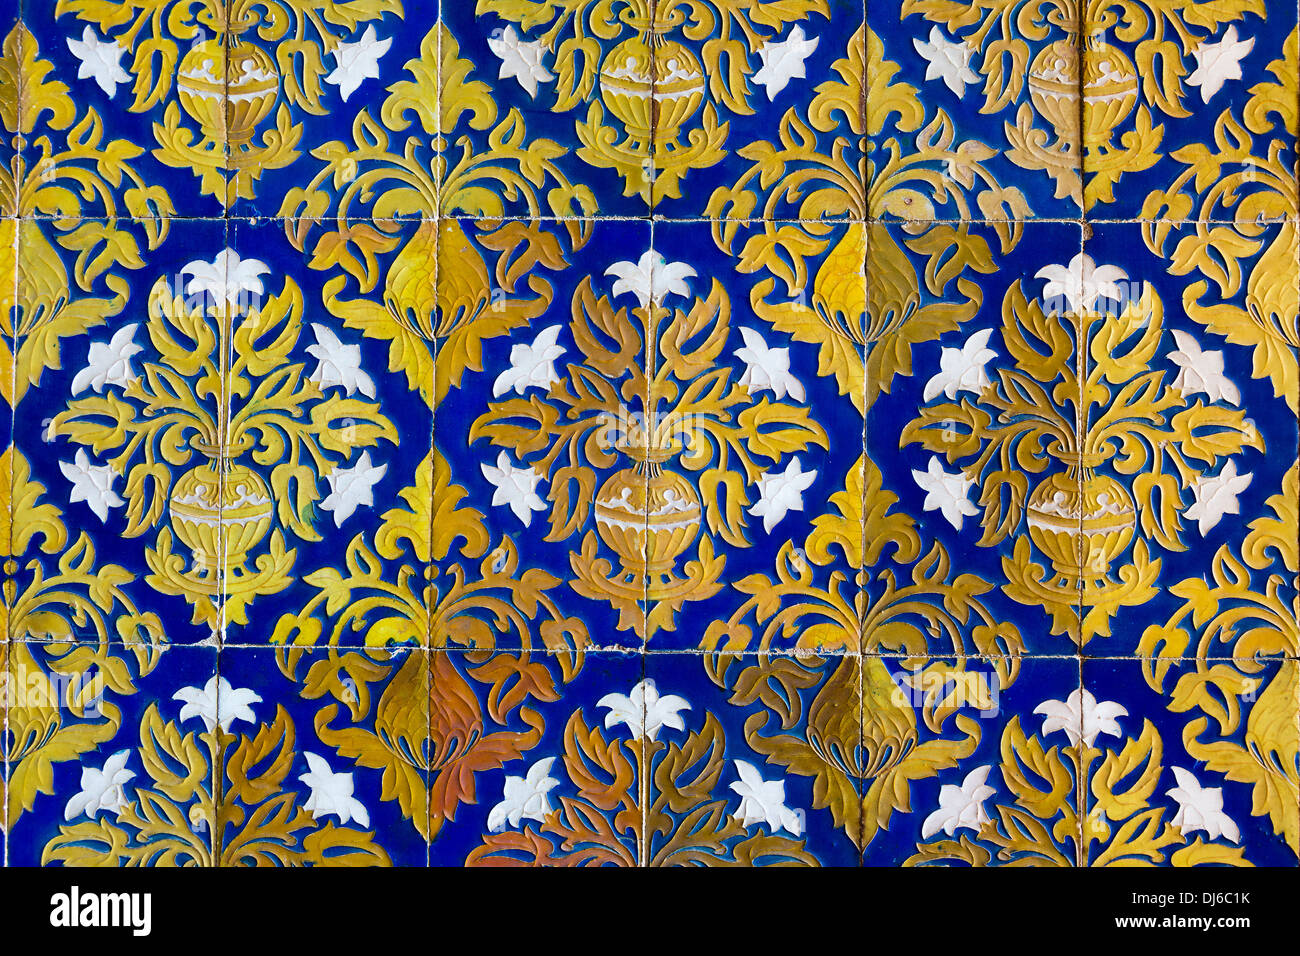 Detail of tiles in the Alcazar royal palace gardens in Seville Spain Stock Photo